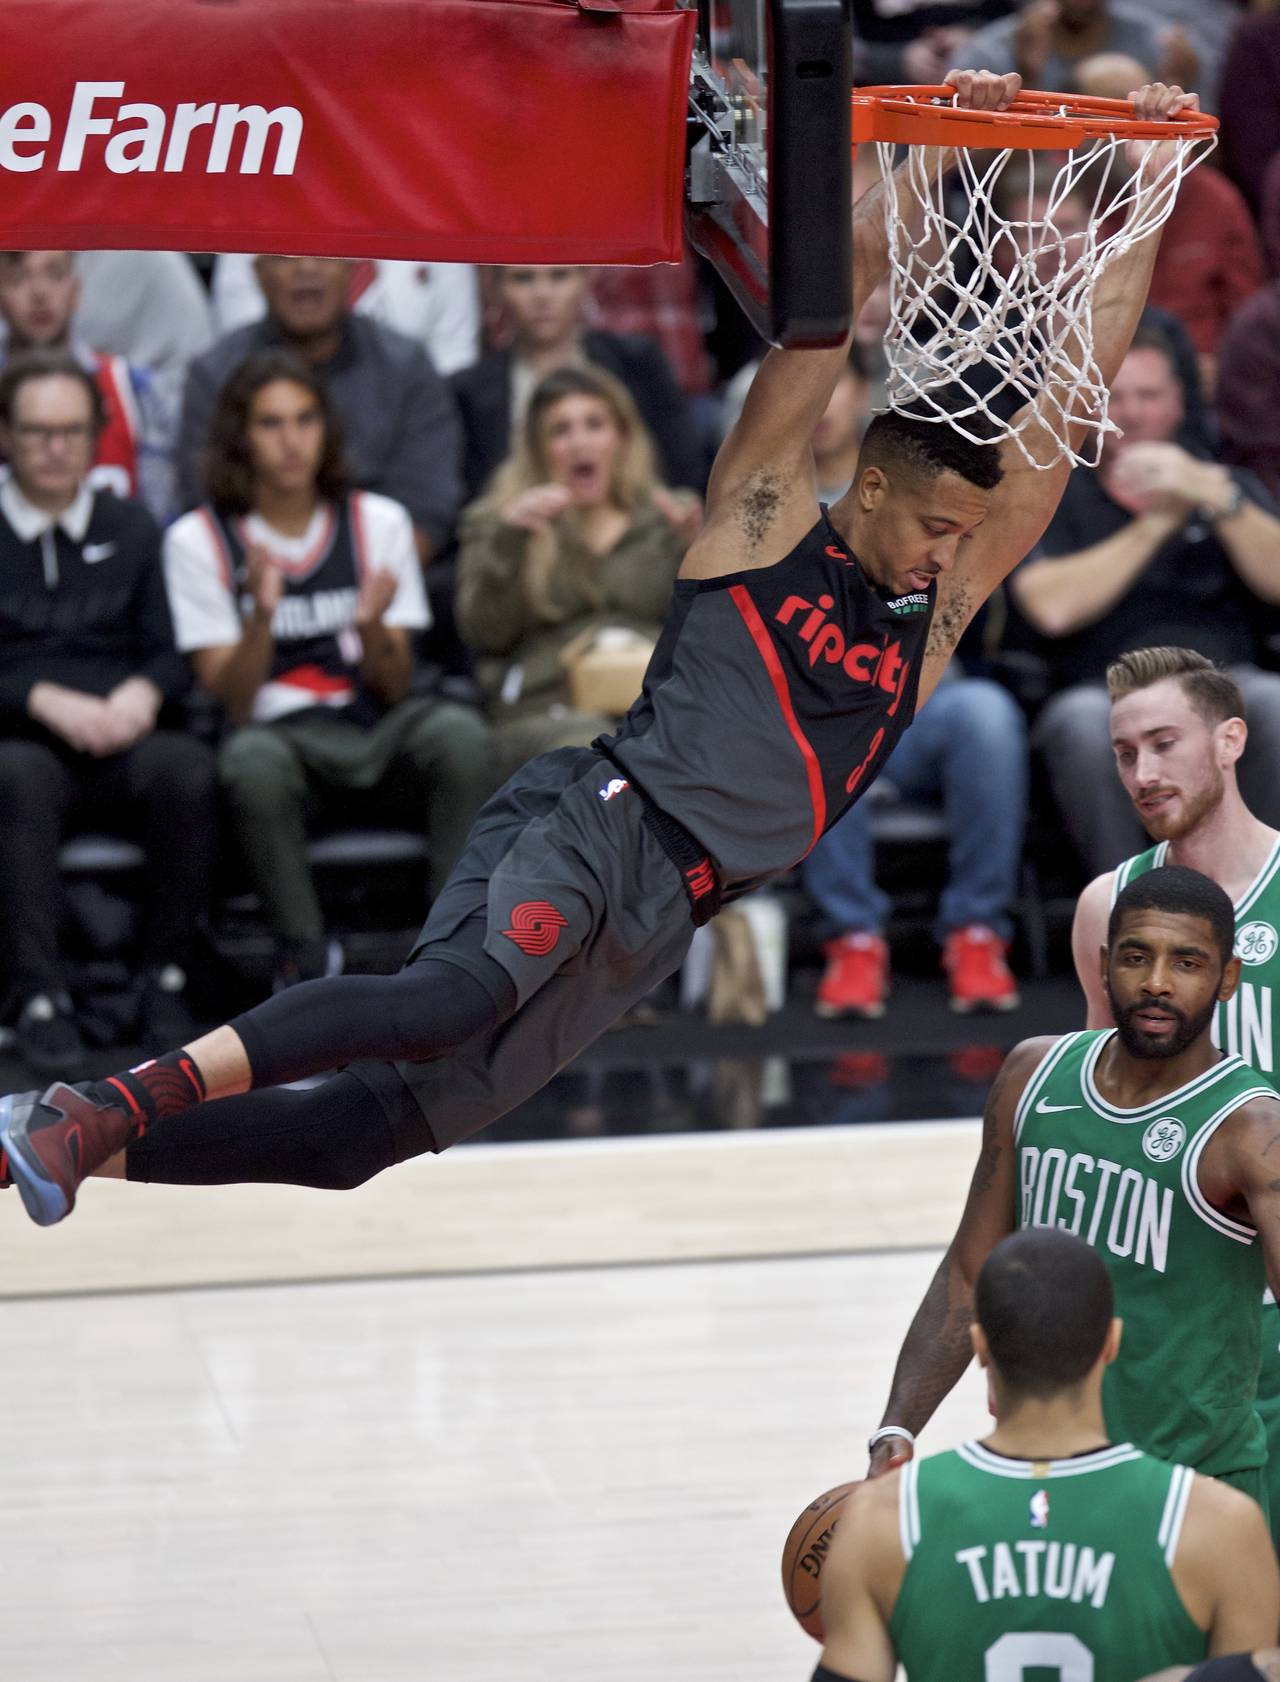 Blazers win fourth straight with 100-94 victory over Boston